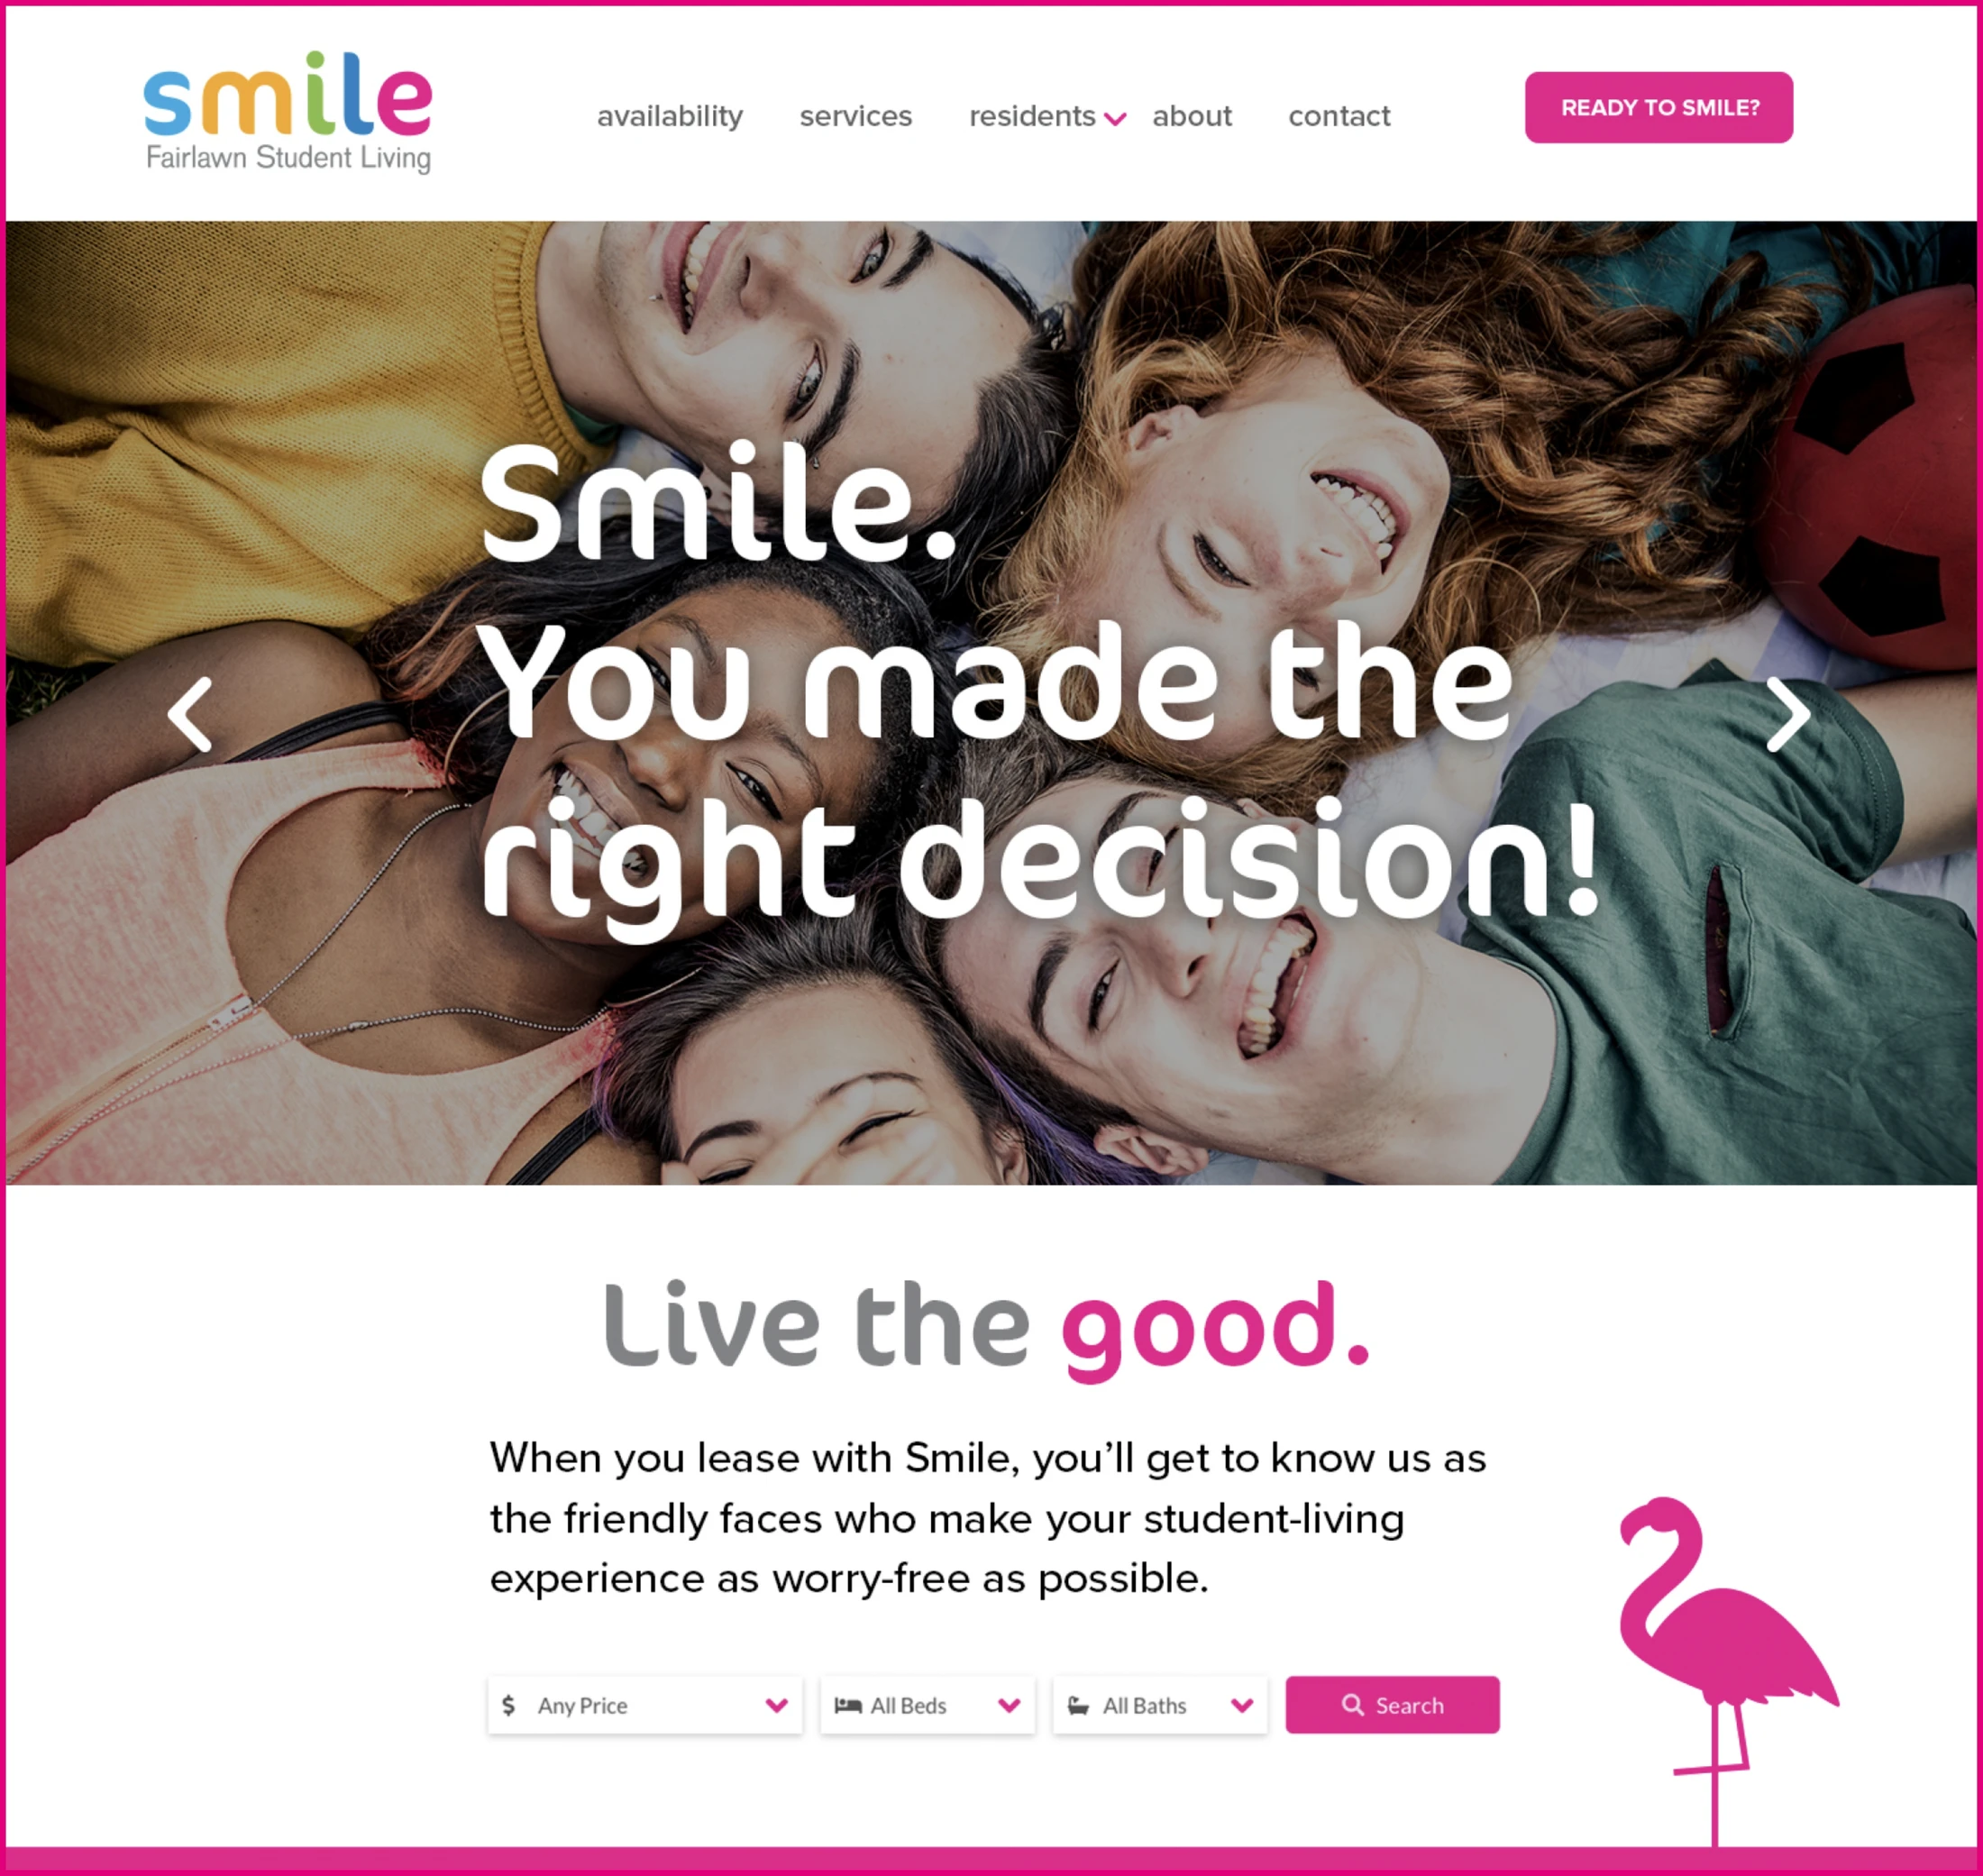 Smile is a pink and white website with flamingos.